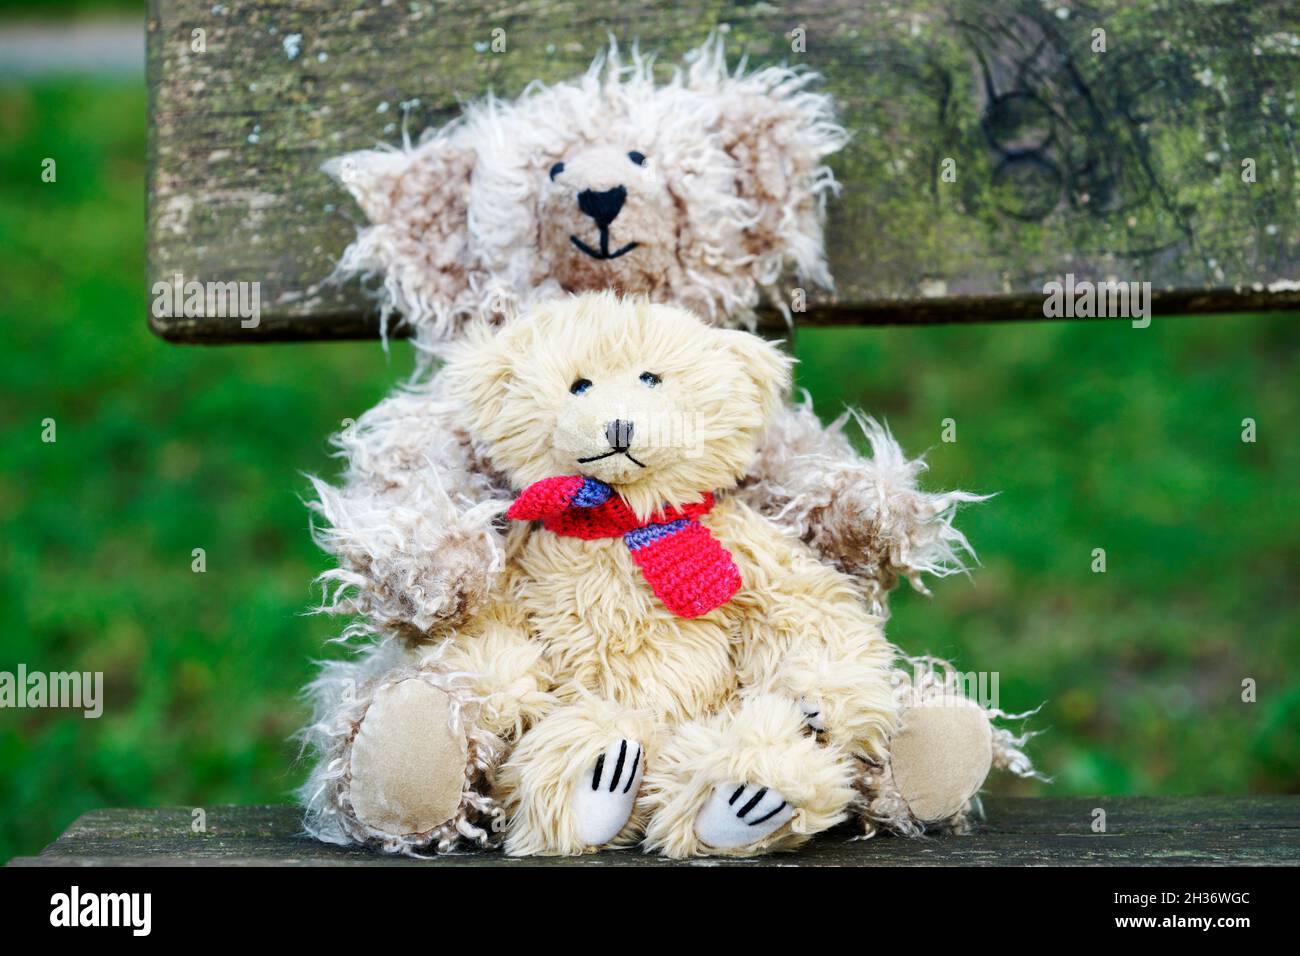 Teddy bears cuddly friends brought to life Stock Photo